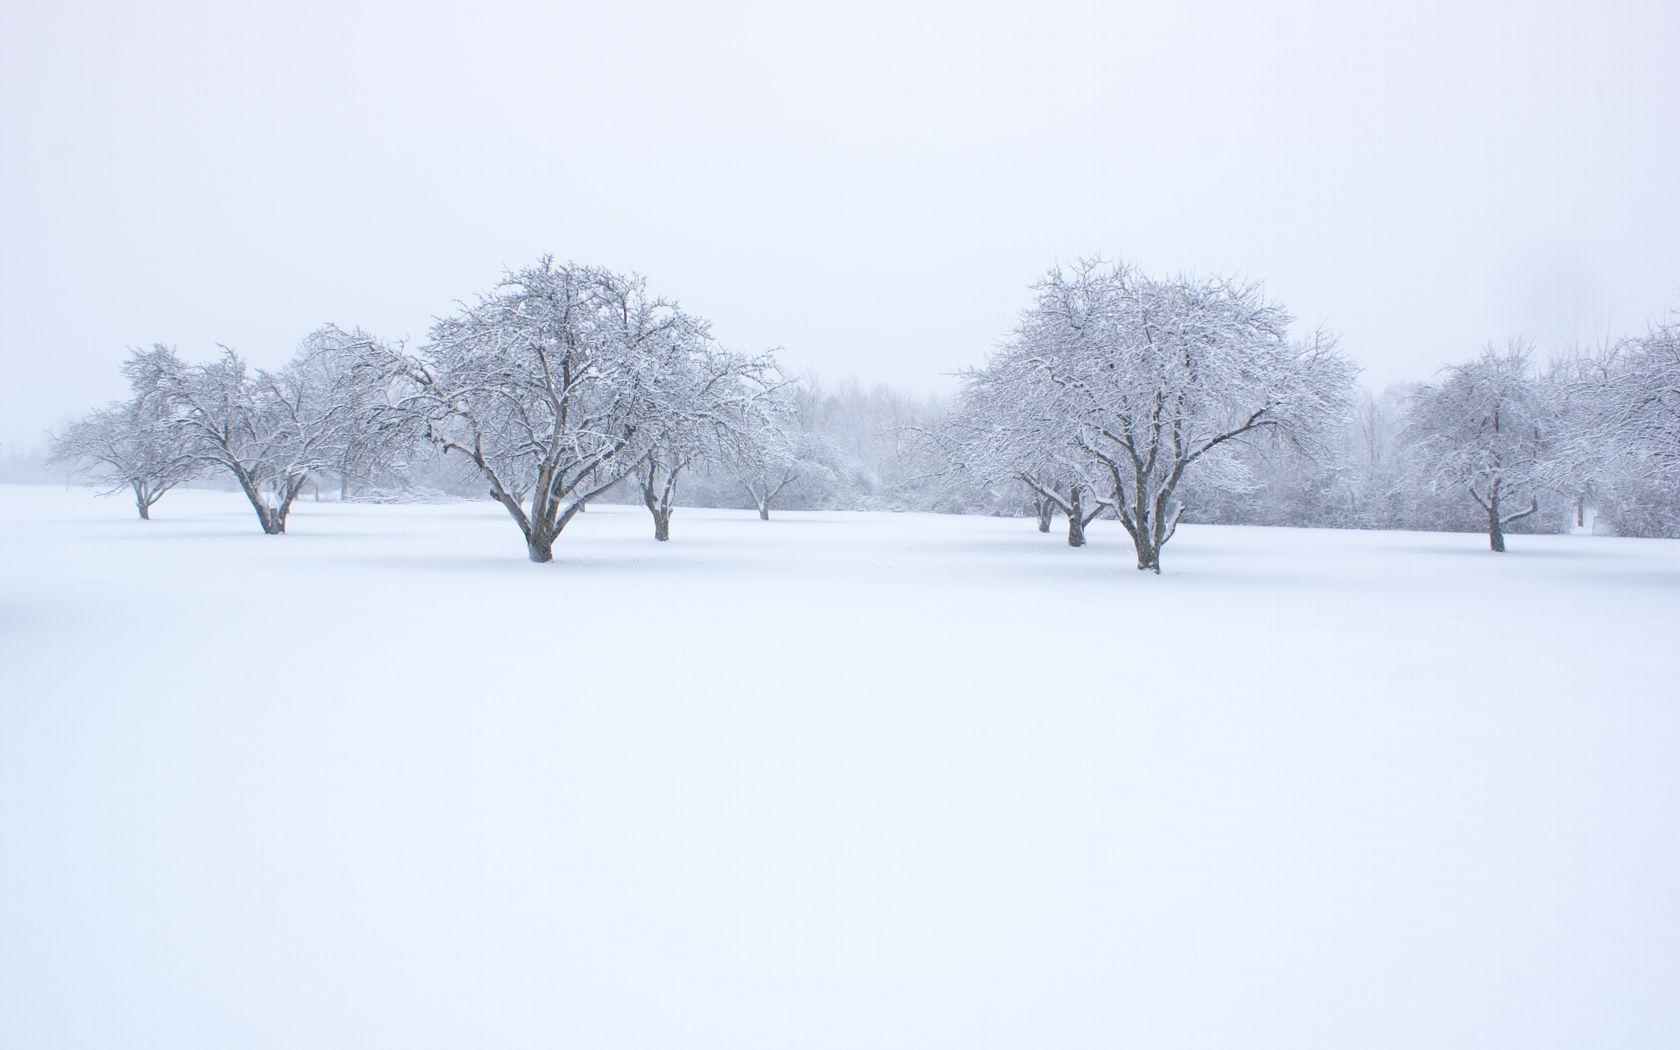 snowy trees hd free download